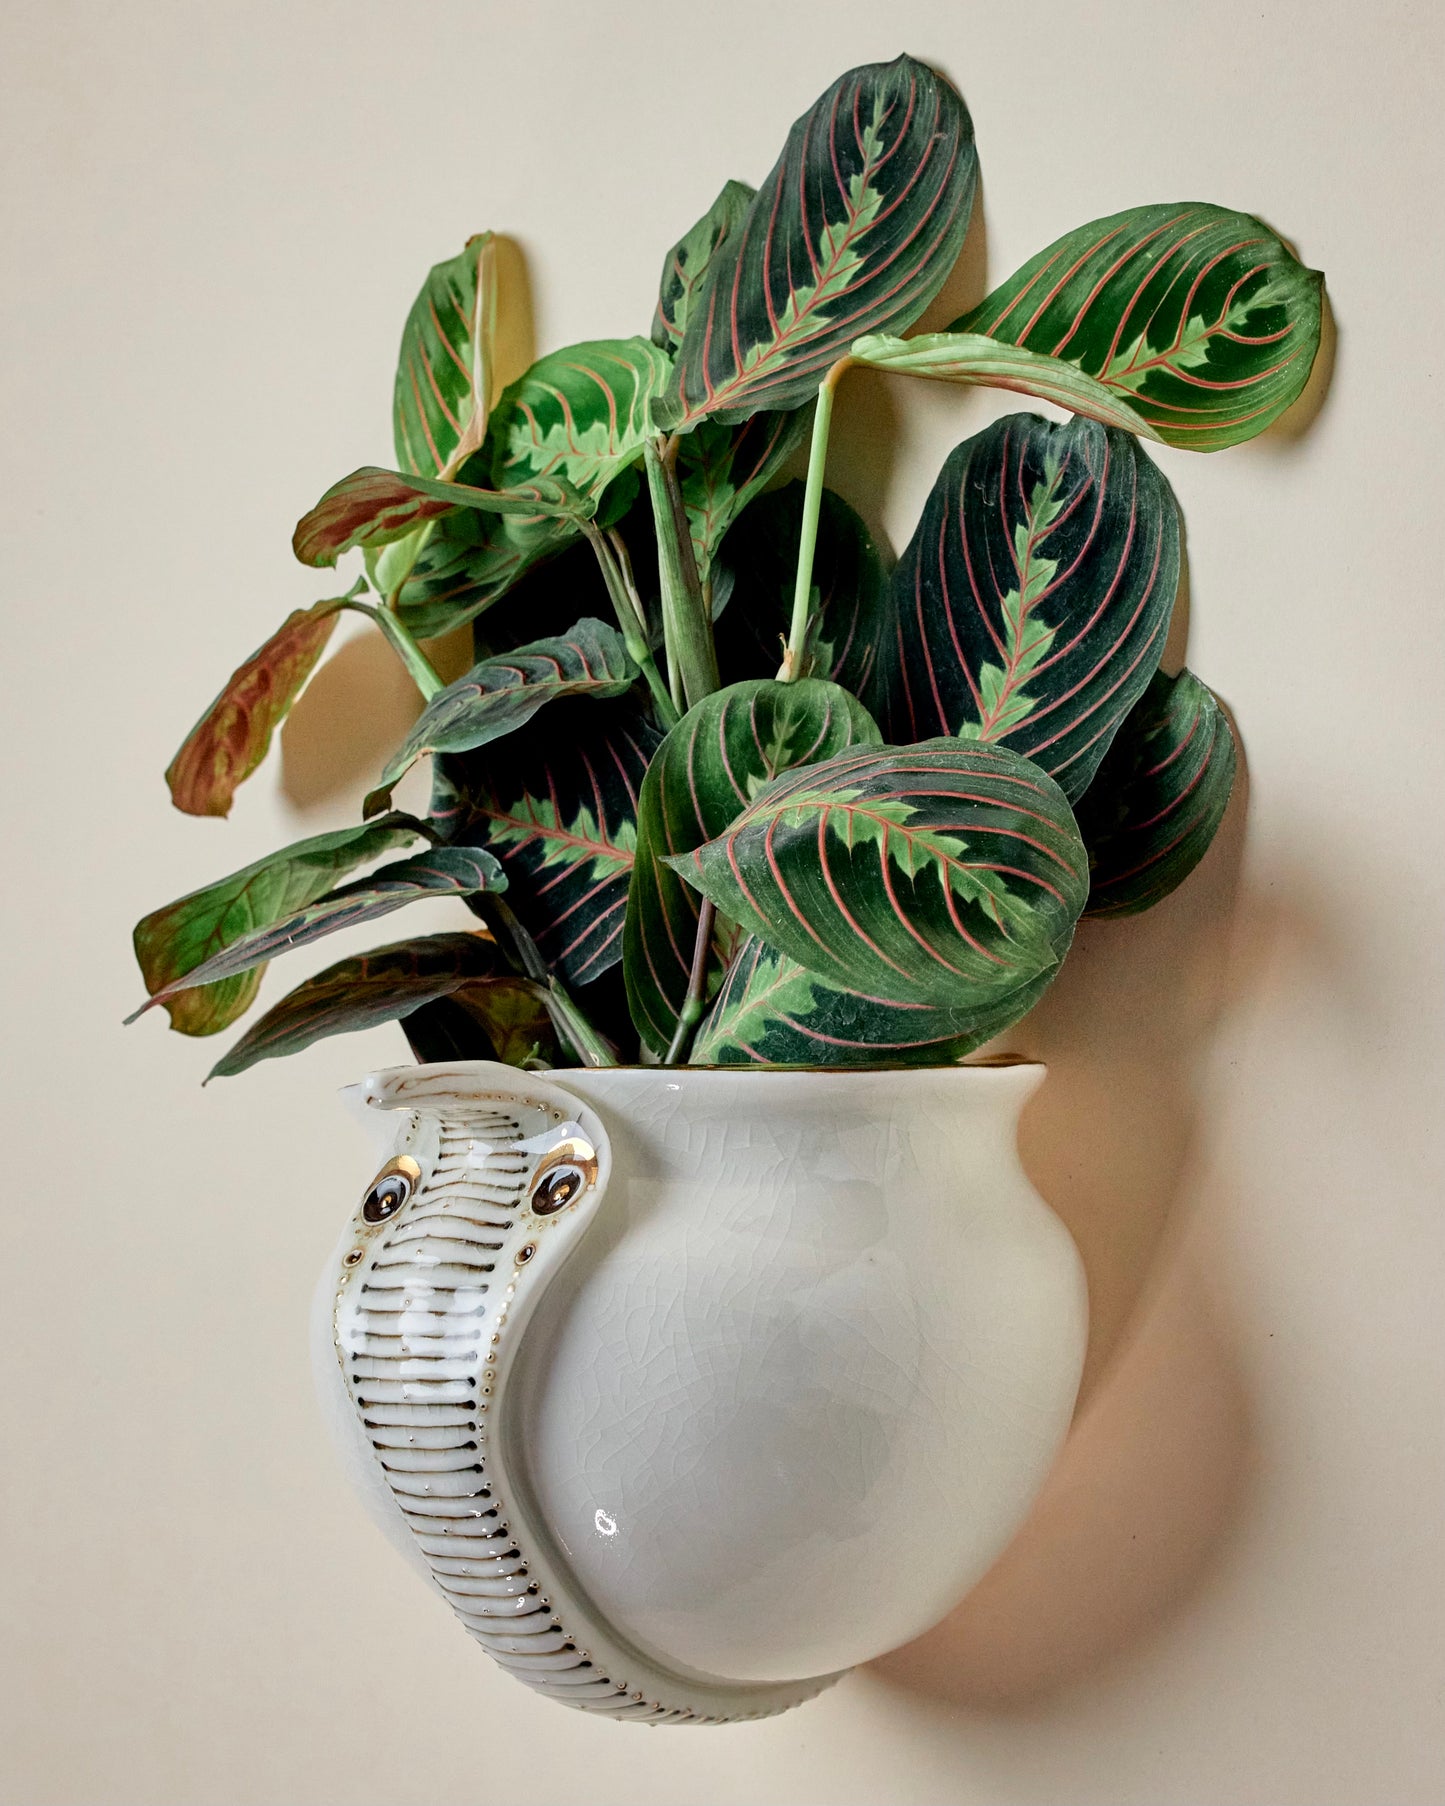 Snake Planter 2 - Hand crafted Porcelain Home Planter with Snake Detail